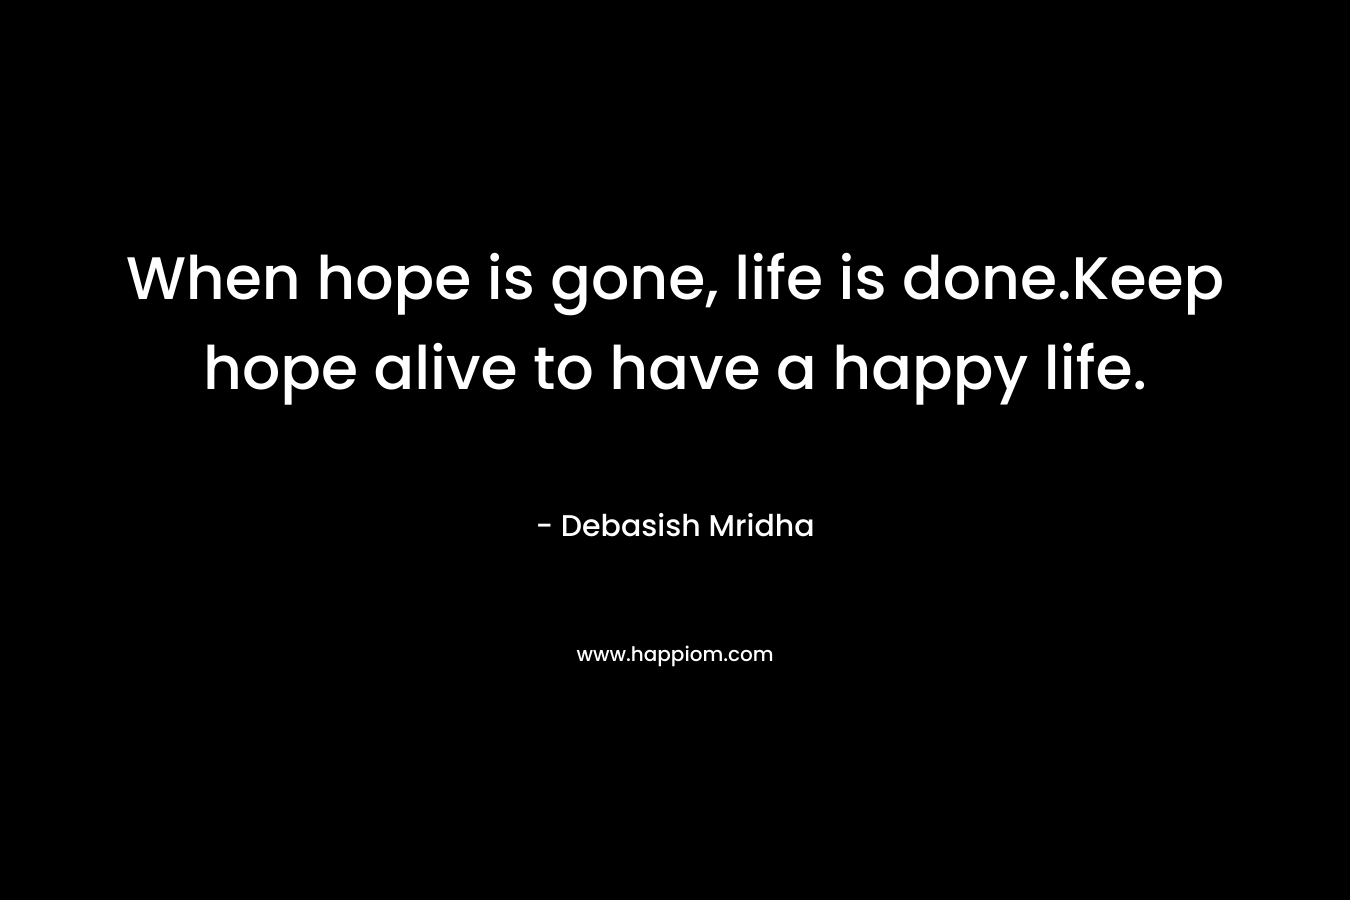 When hope is gone, life is done.Keep hope alive to have a happy life. – Debasish Mridha